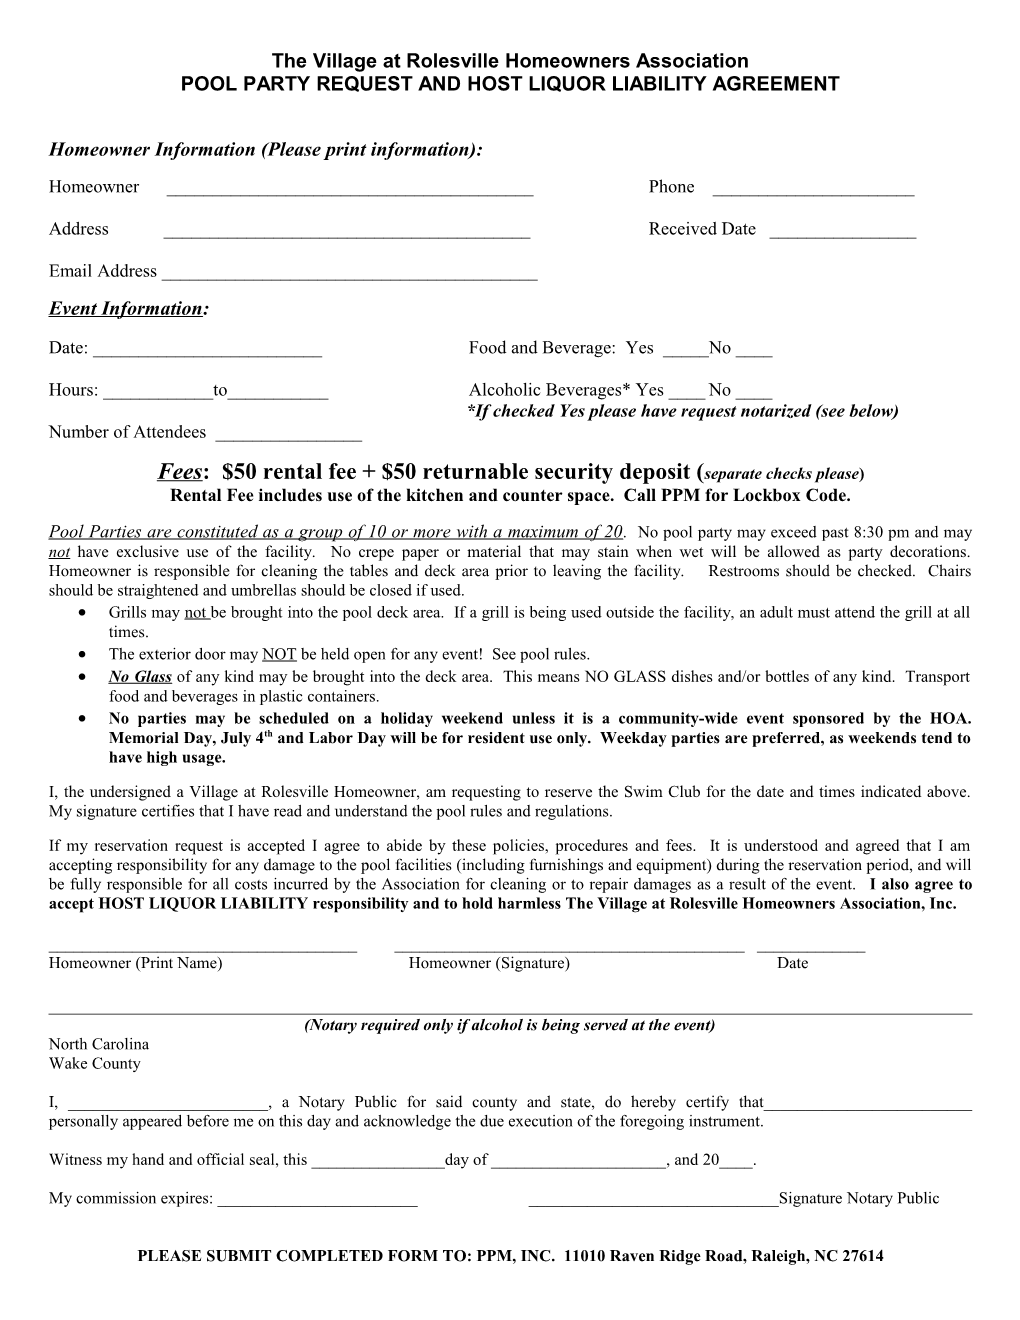 Private Party Request and Host Liquor Liability Agreement